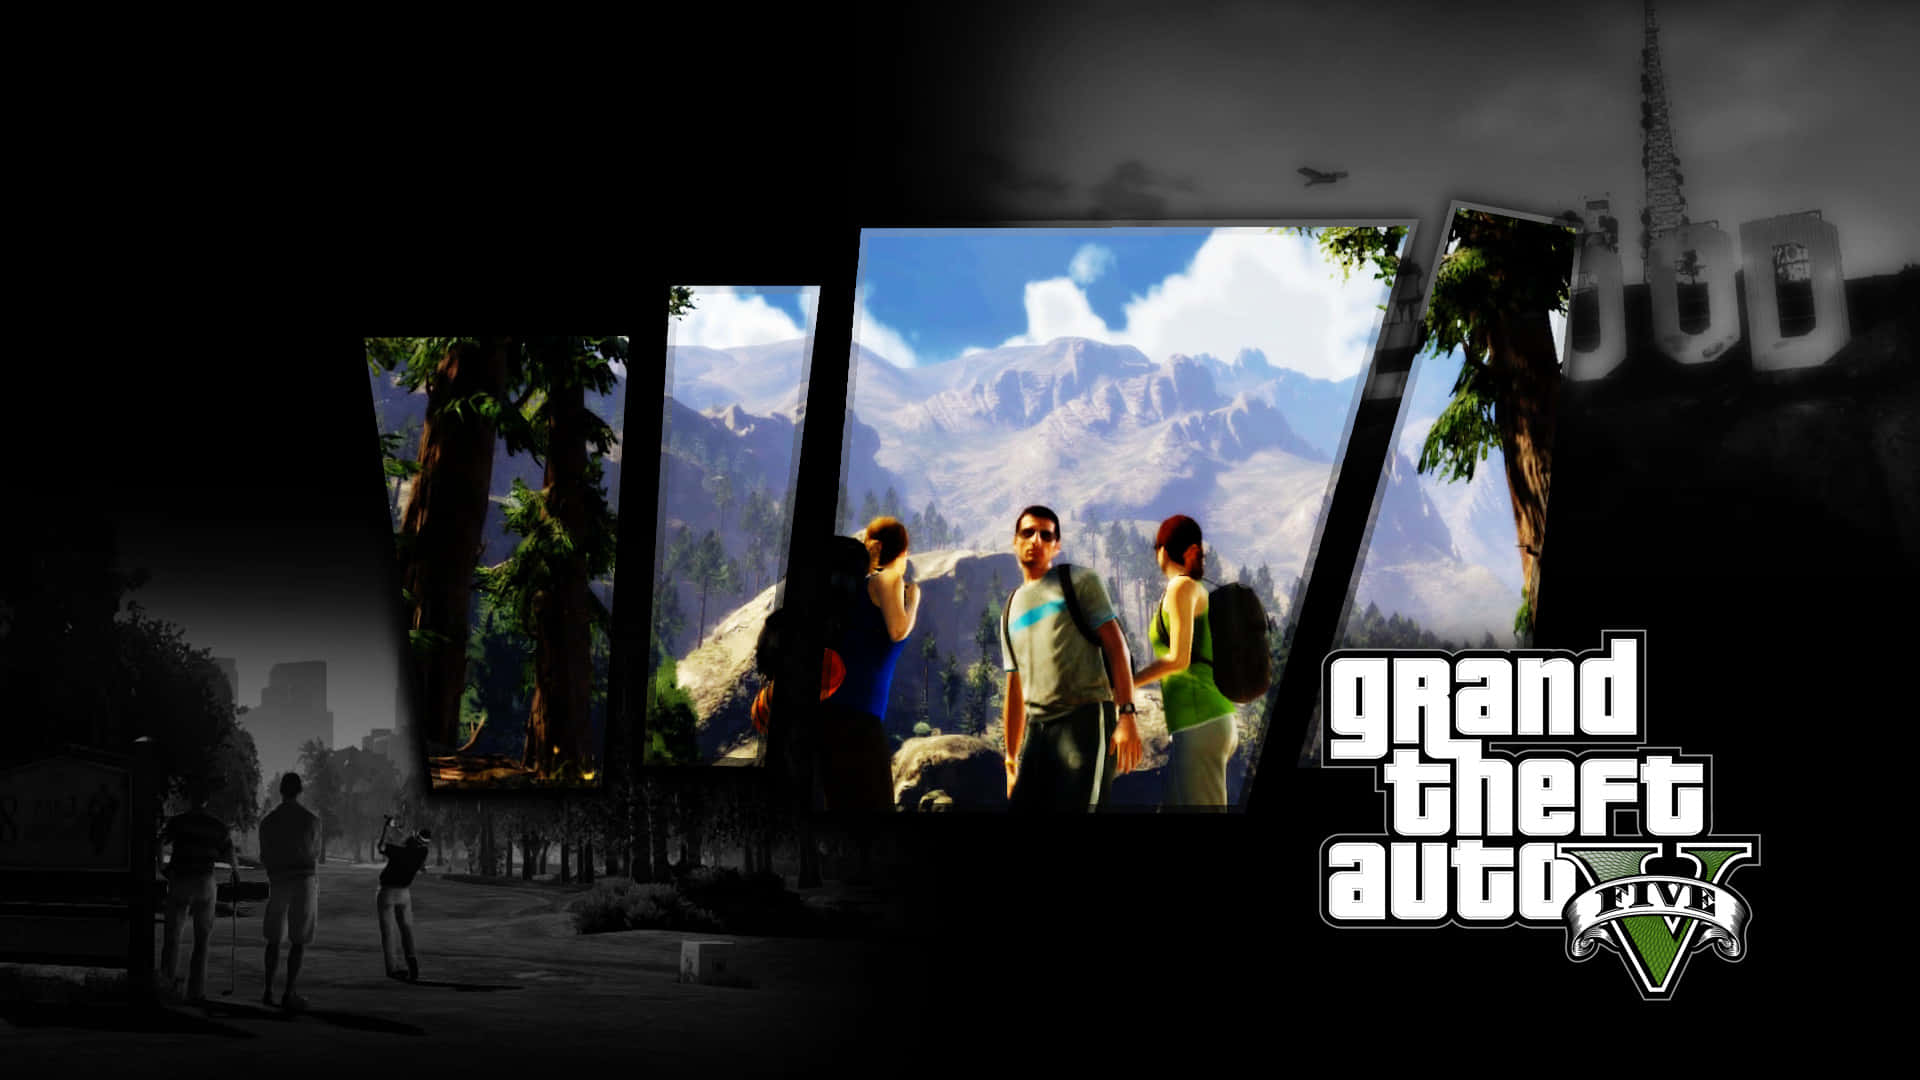 "Experience the Epic Adventure of GTA 5"